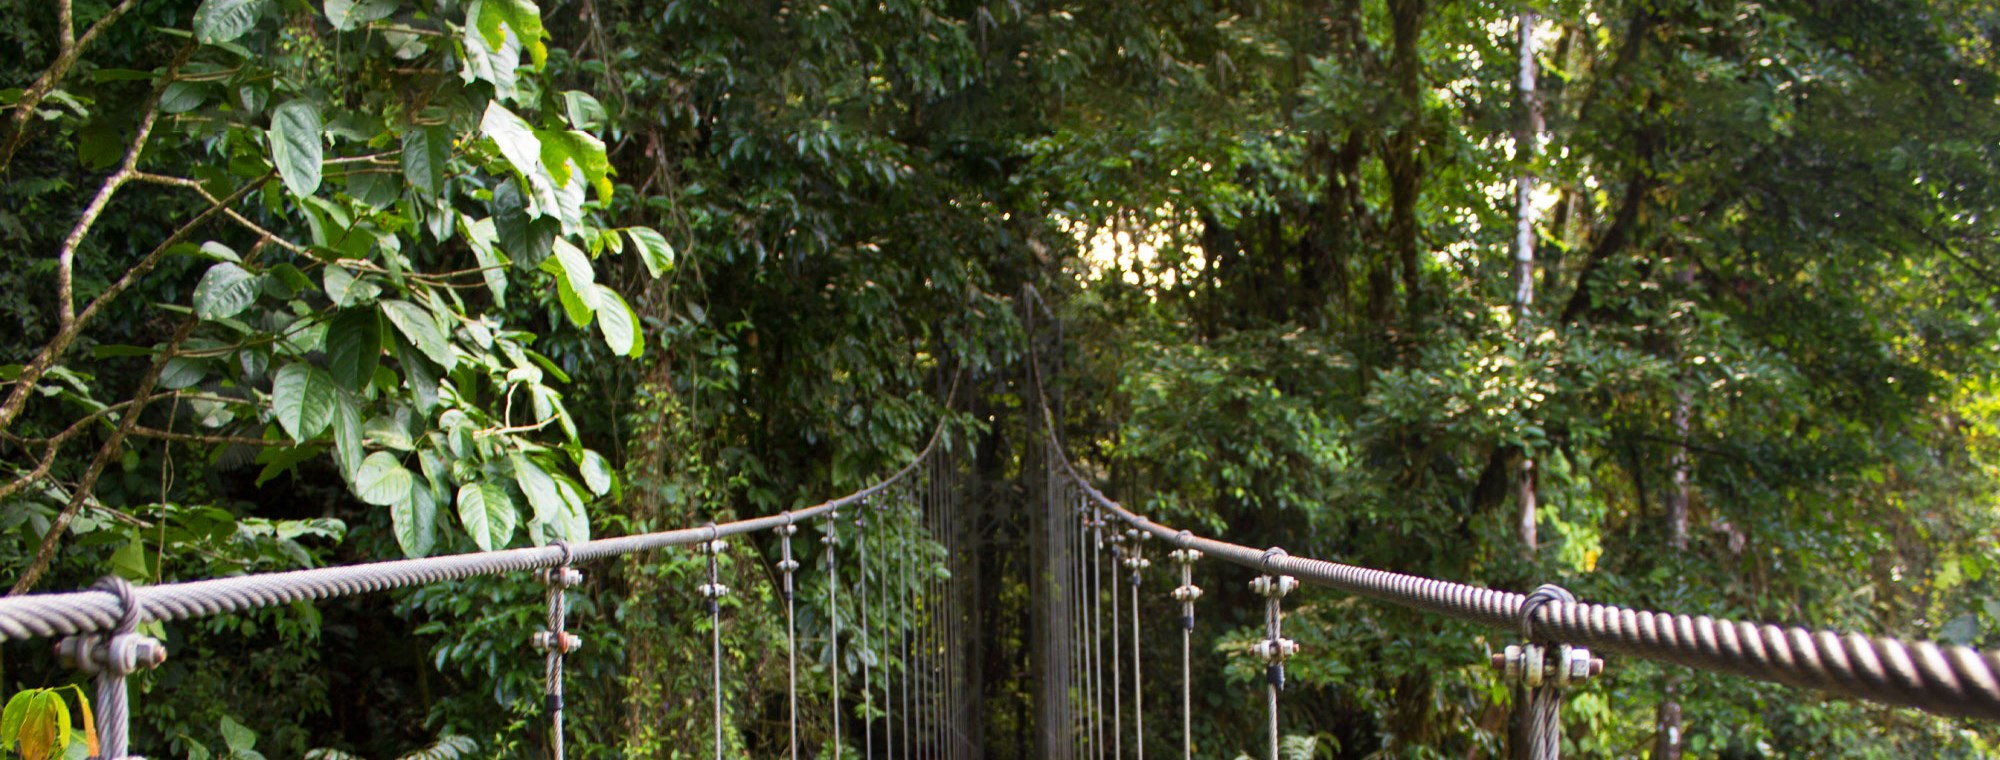 Stroll through the canopy of the Monteverde Cloud Forest on our Costa Rica tours